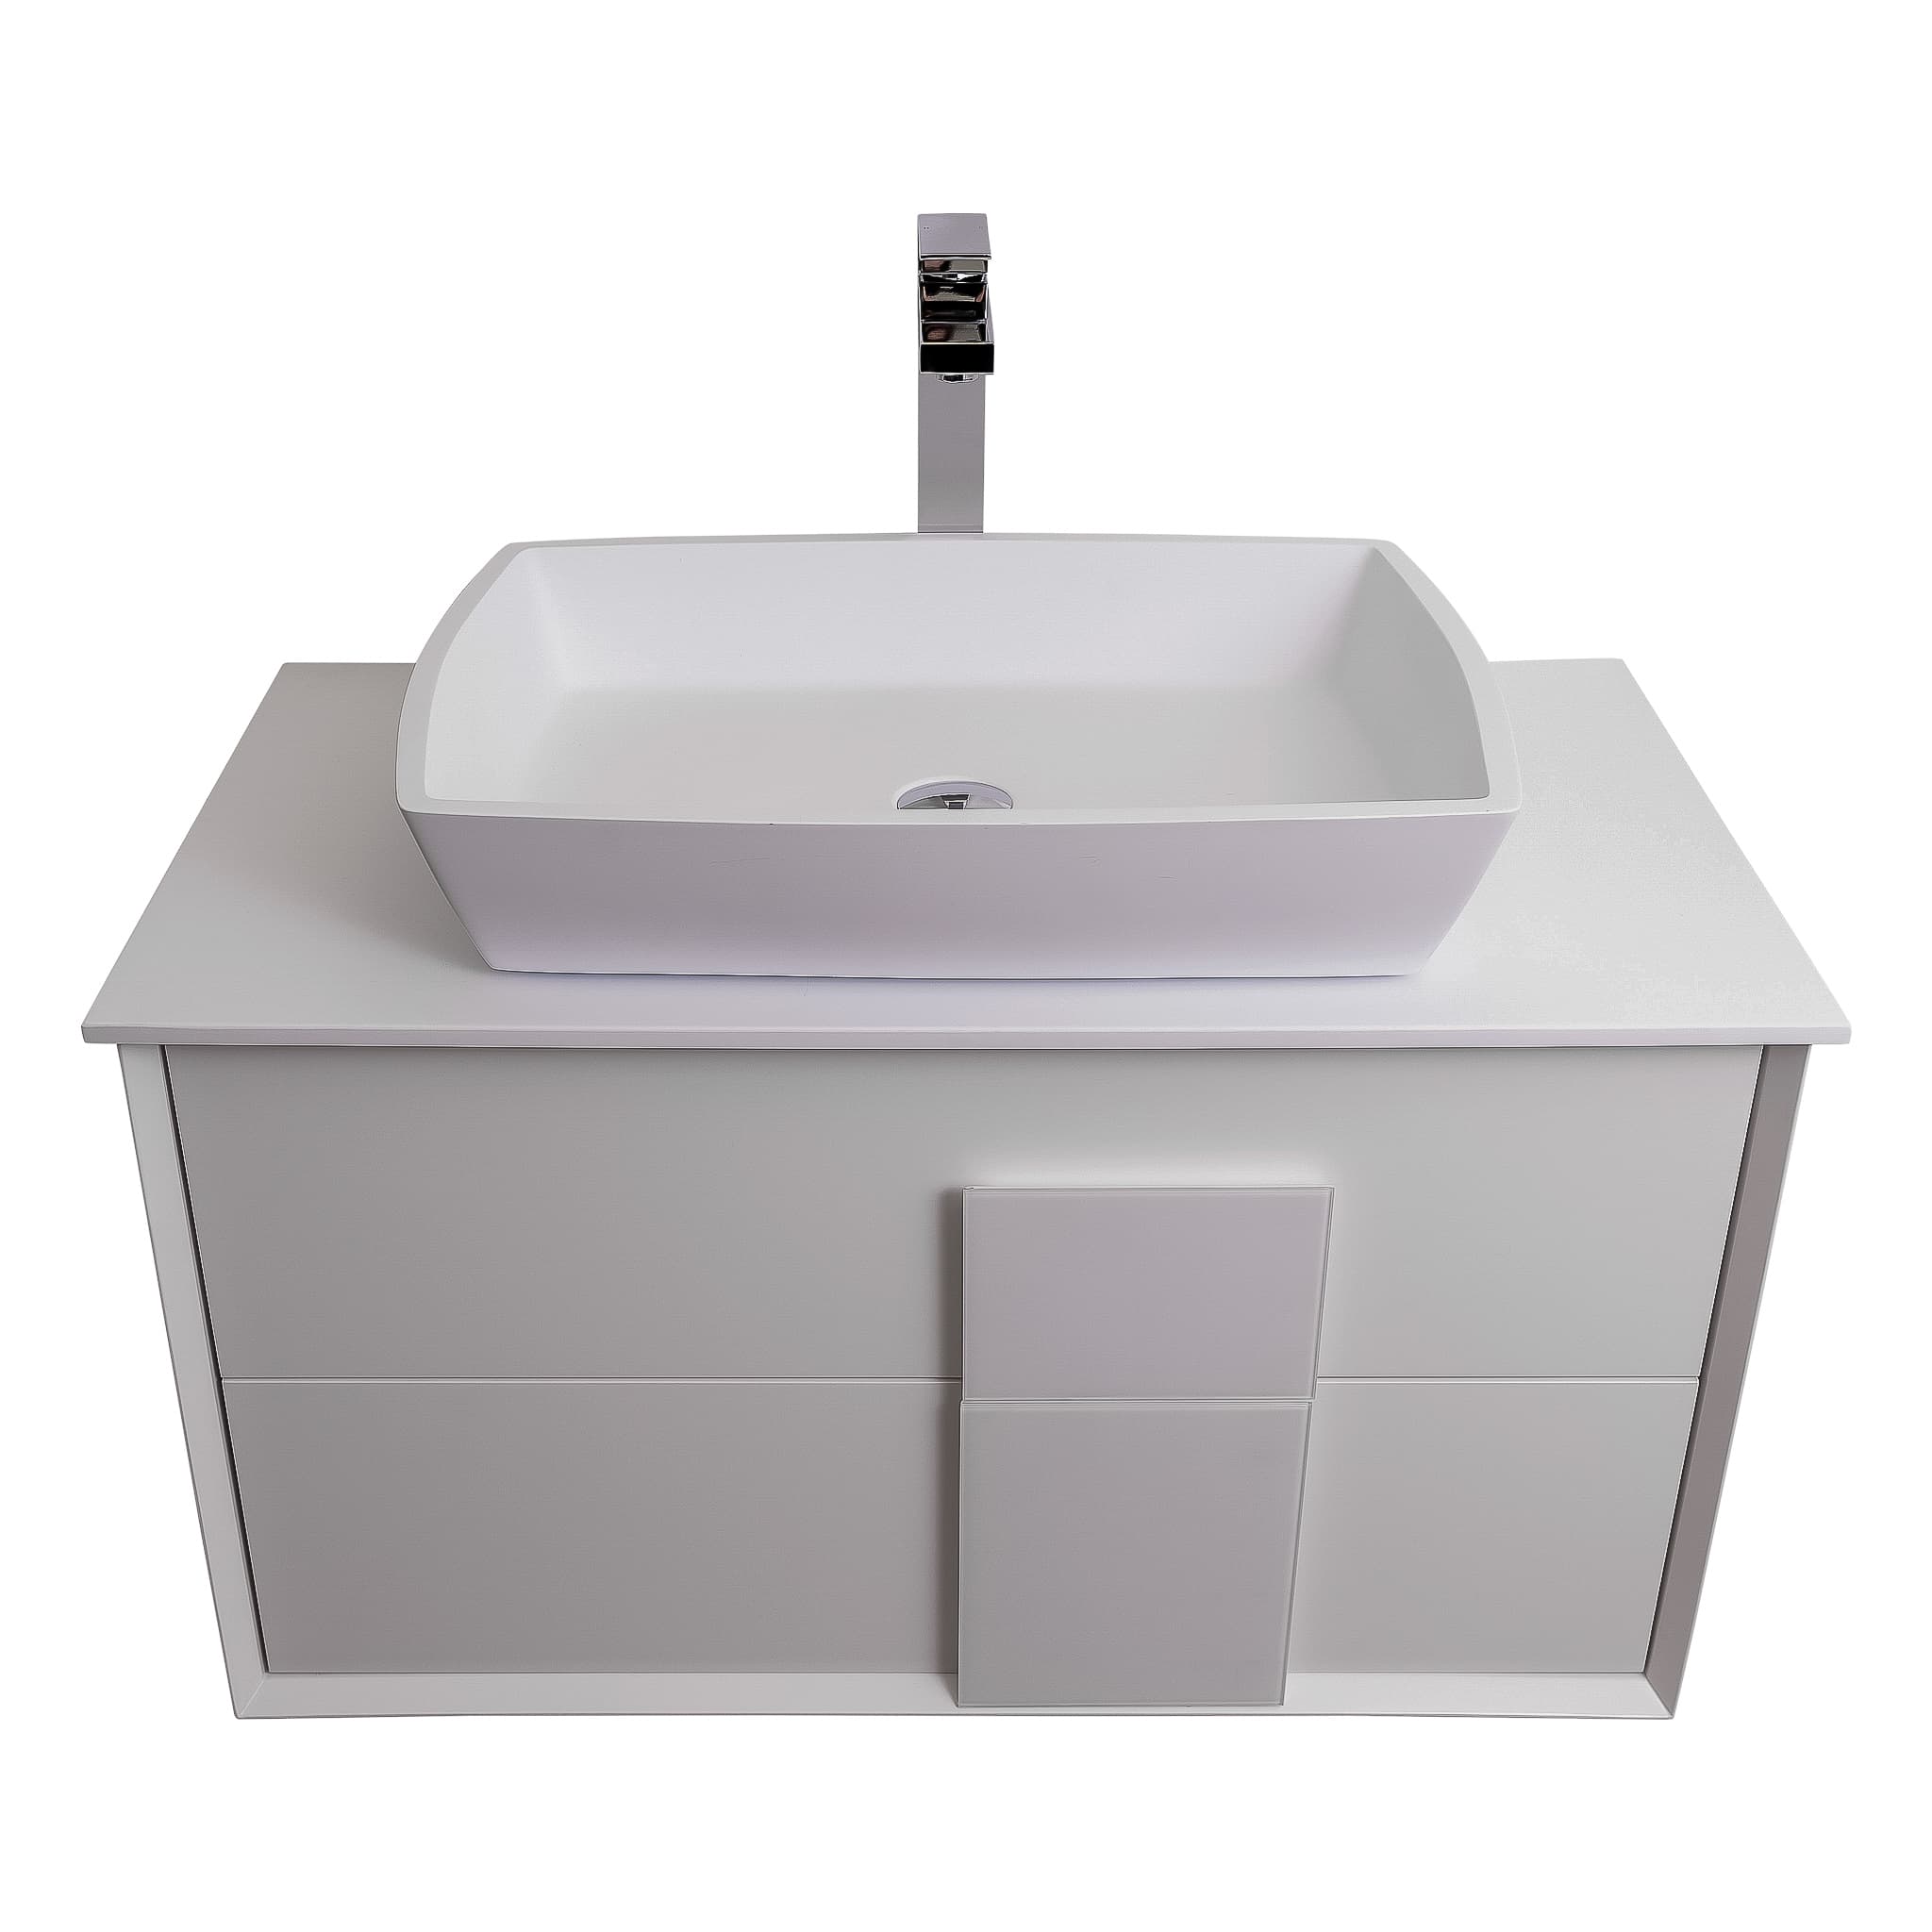 Piazza 31.5 Matte White With White Handle Cabinet, Solid Surface Flat White Counter and Square Solid Surface White Basin 1316, Wall Mounted Modern Vanity Set